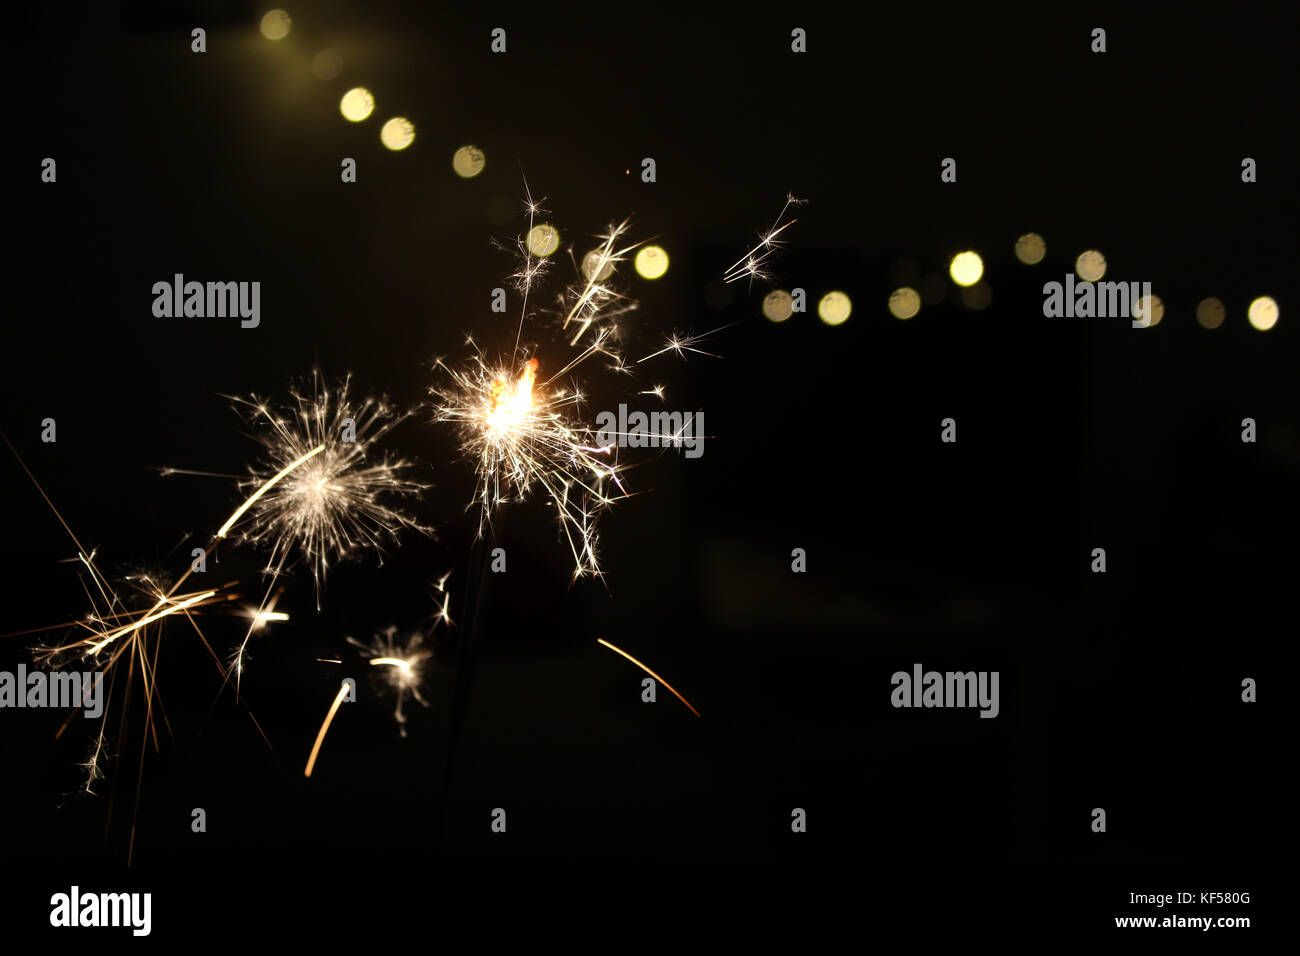 Sparkler lights during New Year's Eve Stock Photo